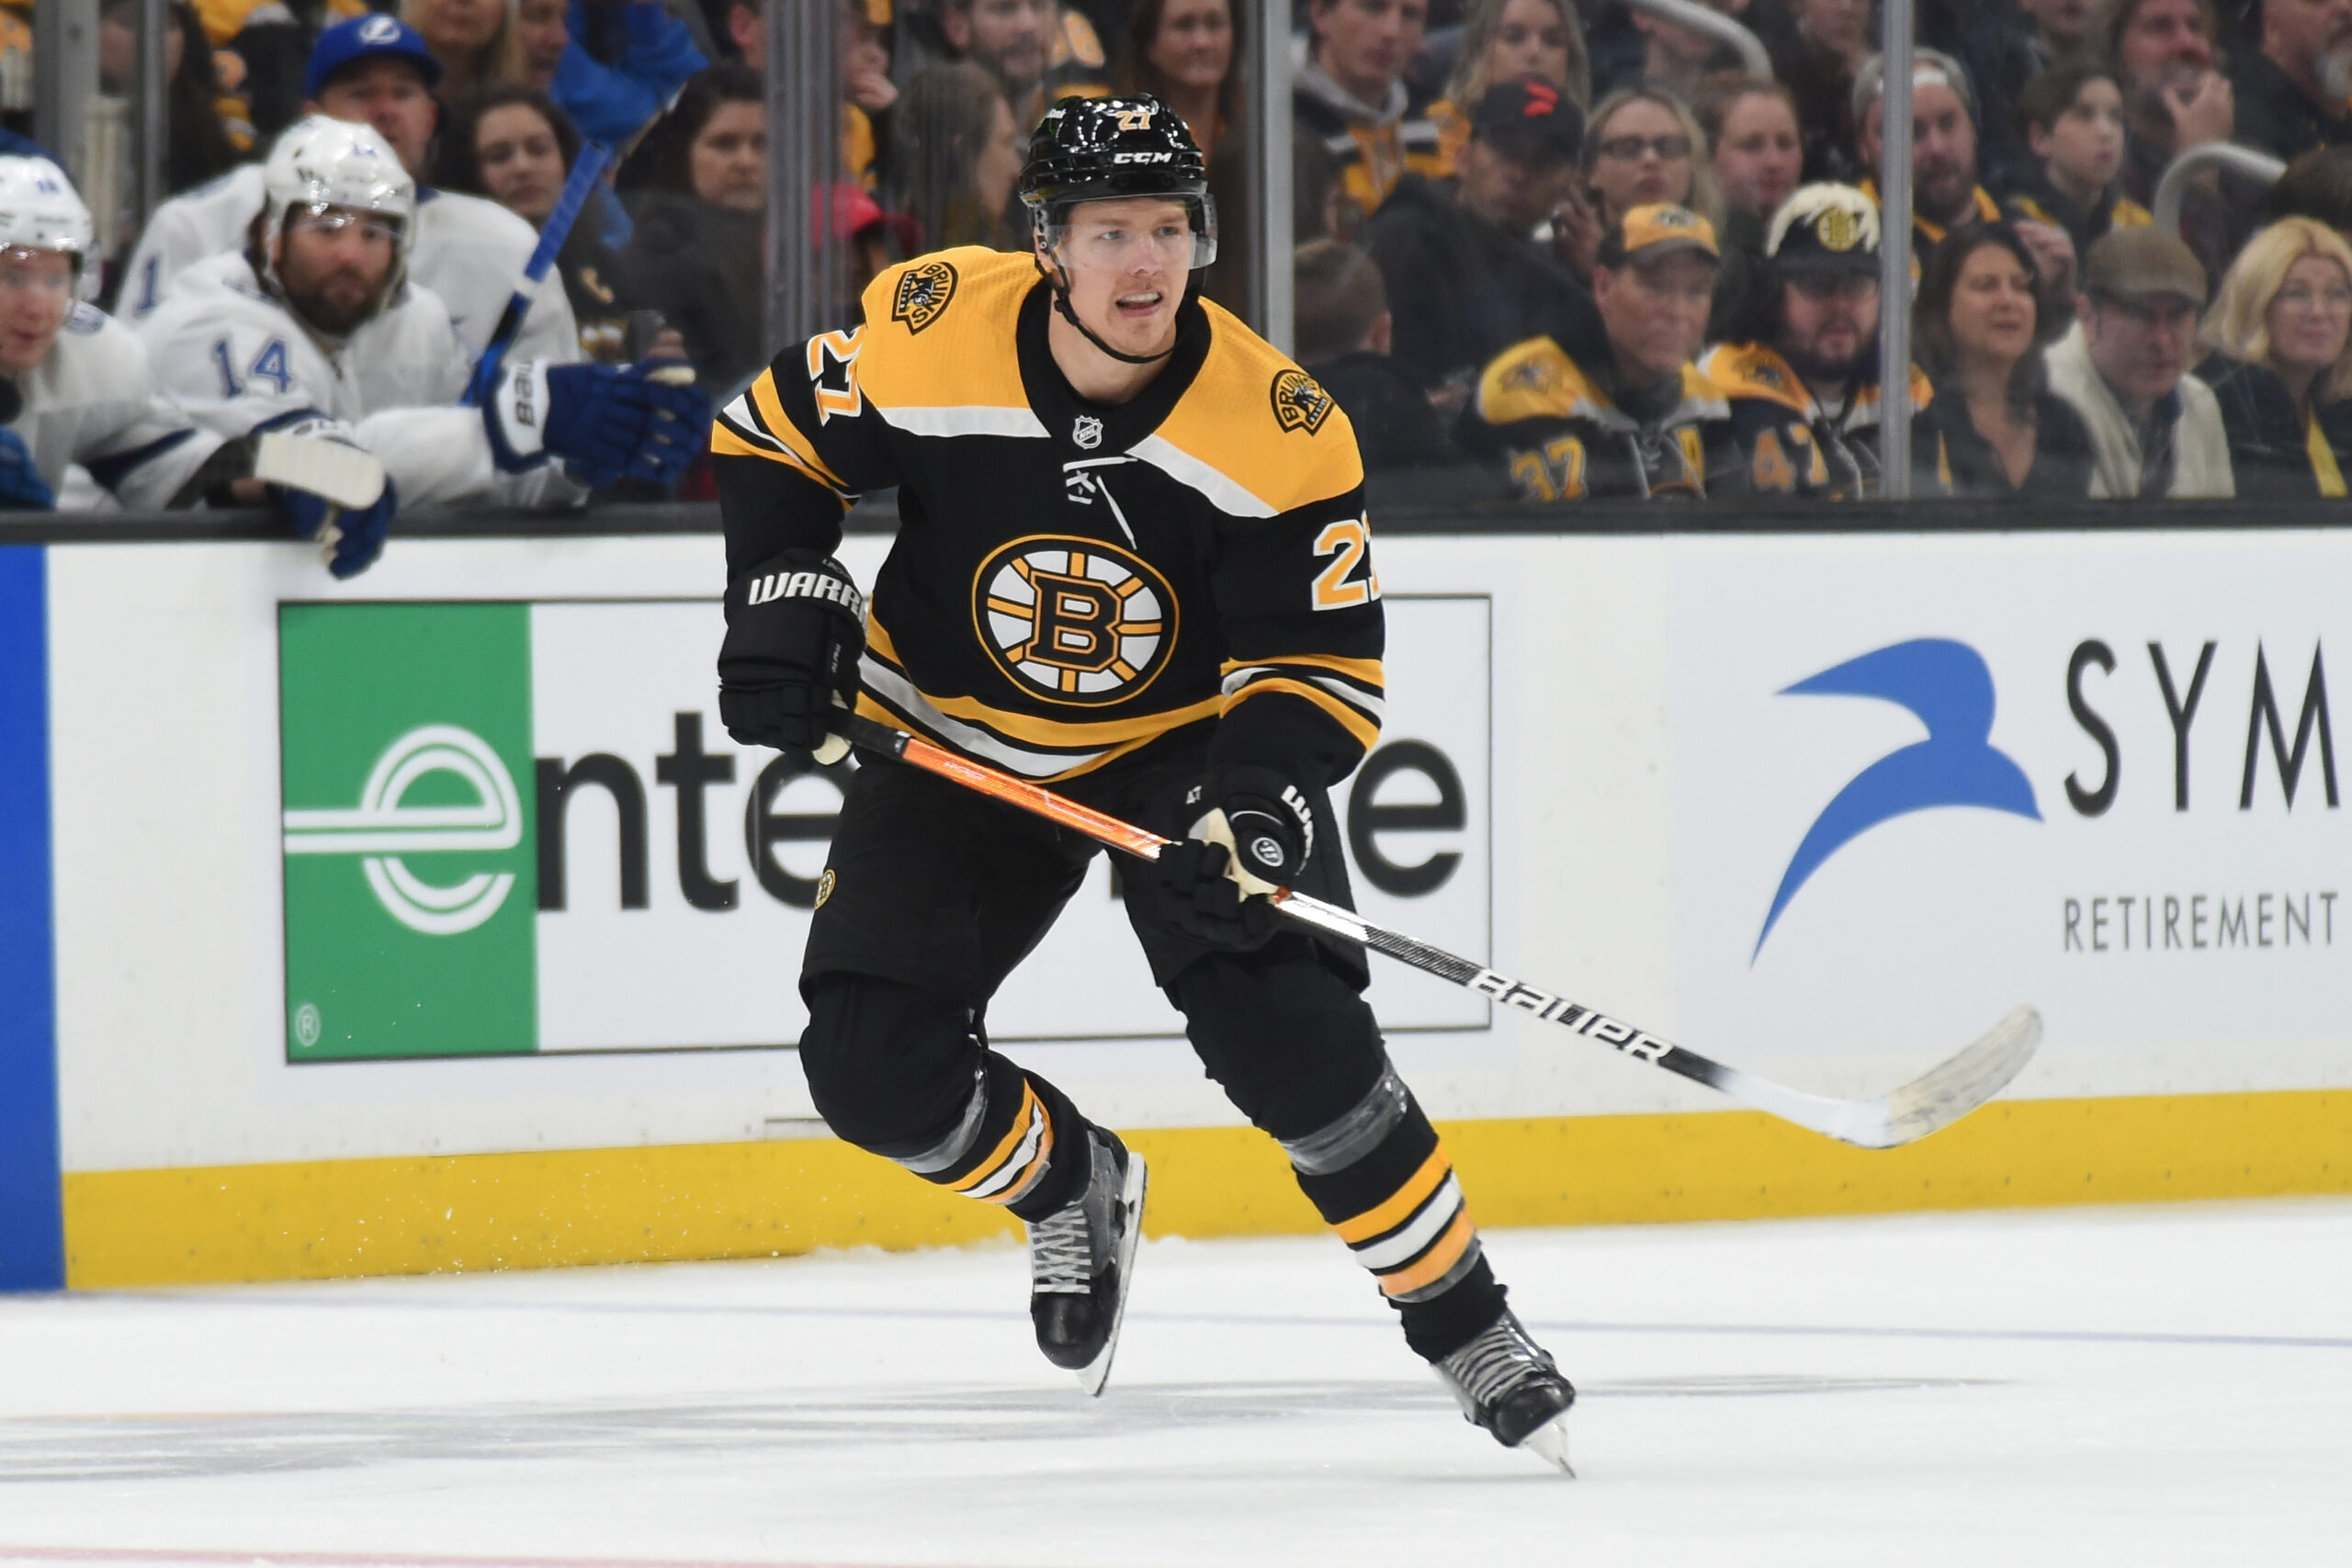 Charlie Coyle acquisition paying off for Bruins GM Sweeney